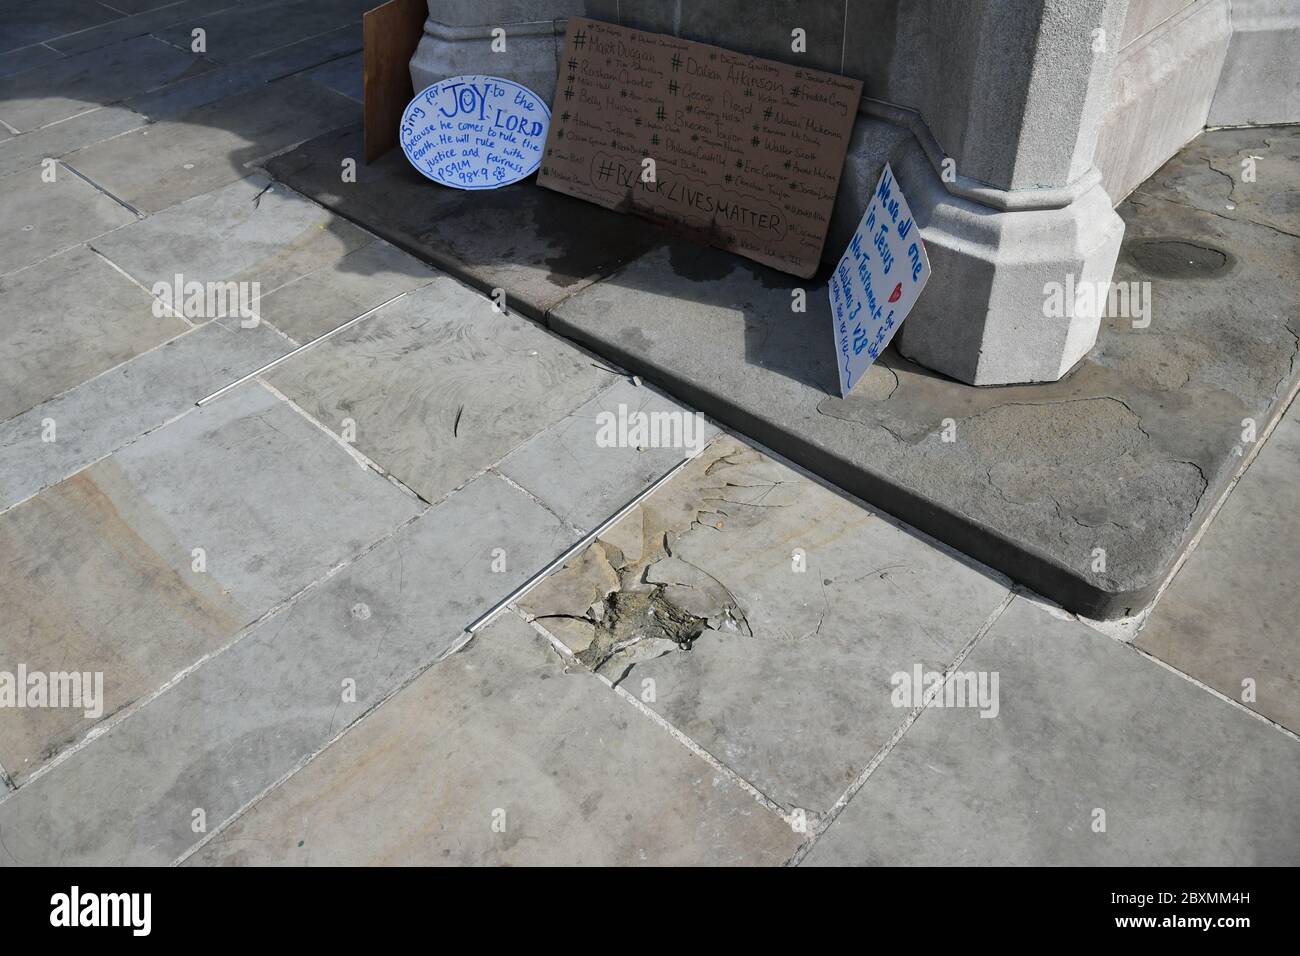 Damage by the empty plinth where the statue of Edward Colston in Bristol once stood after it was taken down during a Black Lives Matter protest on Sunday. The protests were sparked by the death of George Floyd, who was killed on May 25 while in police custody in the US city of Minneapolis. Stock Photo